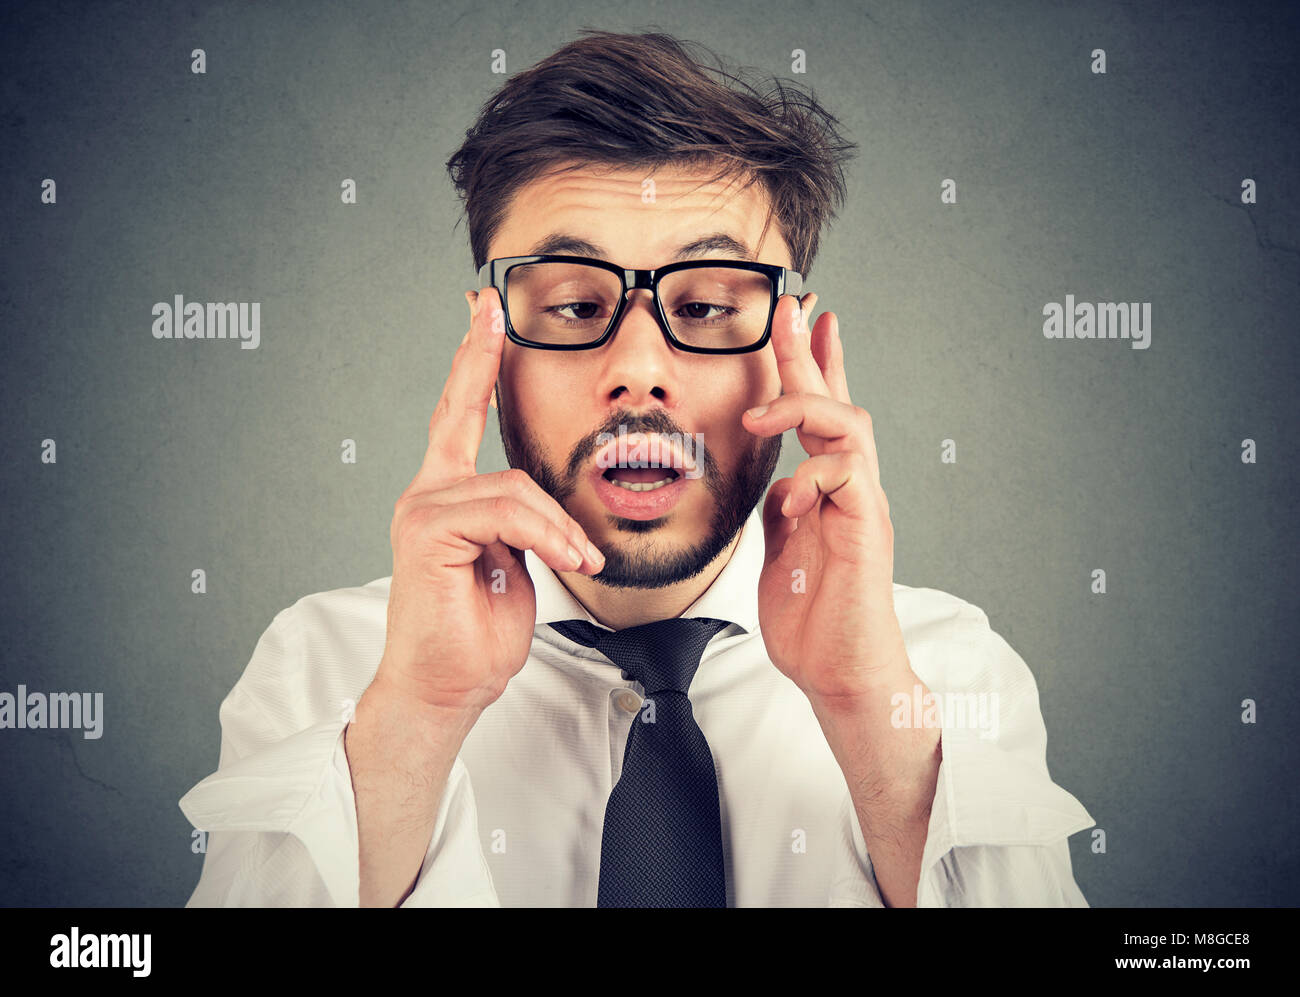 Young man with strabismus vision problems Stock Photo